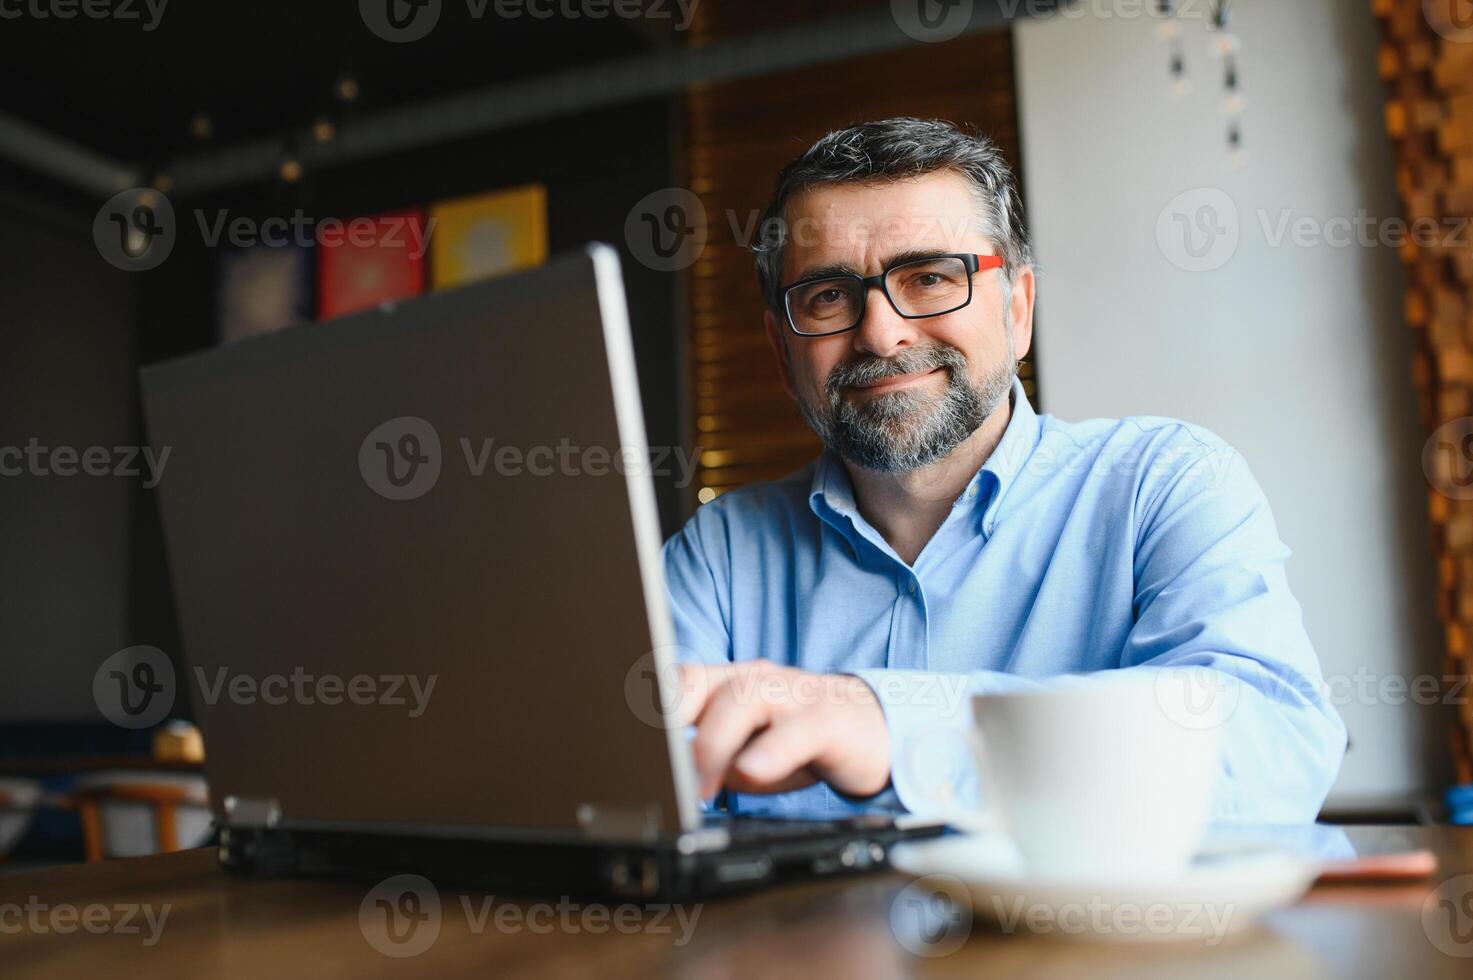 Mature businessman drinking coffee in cafe. Portrait of handsome man wearing stylish eyeglasses using laptop, looking at camera, smiling. Coffee break concept photo